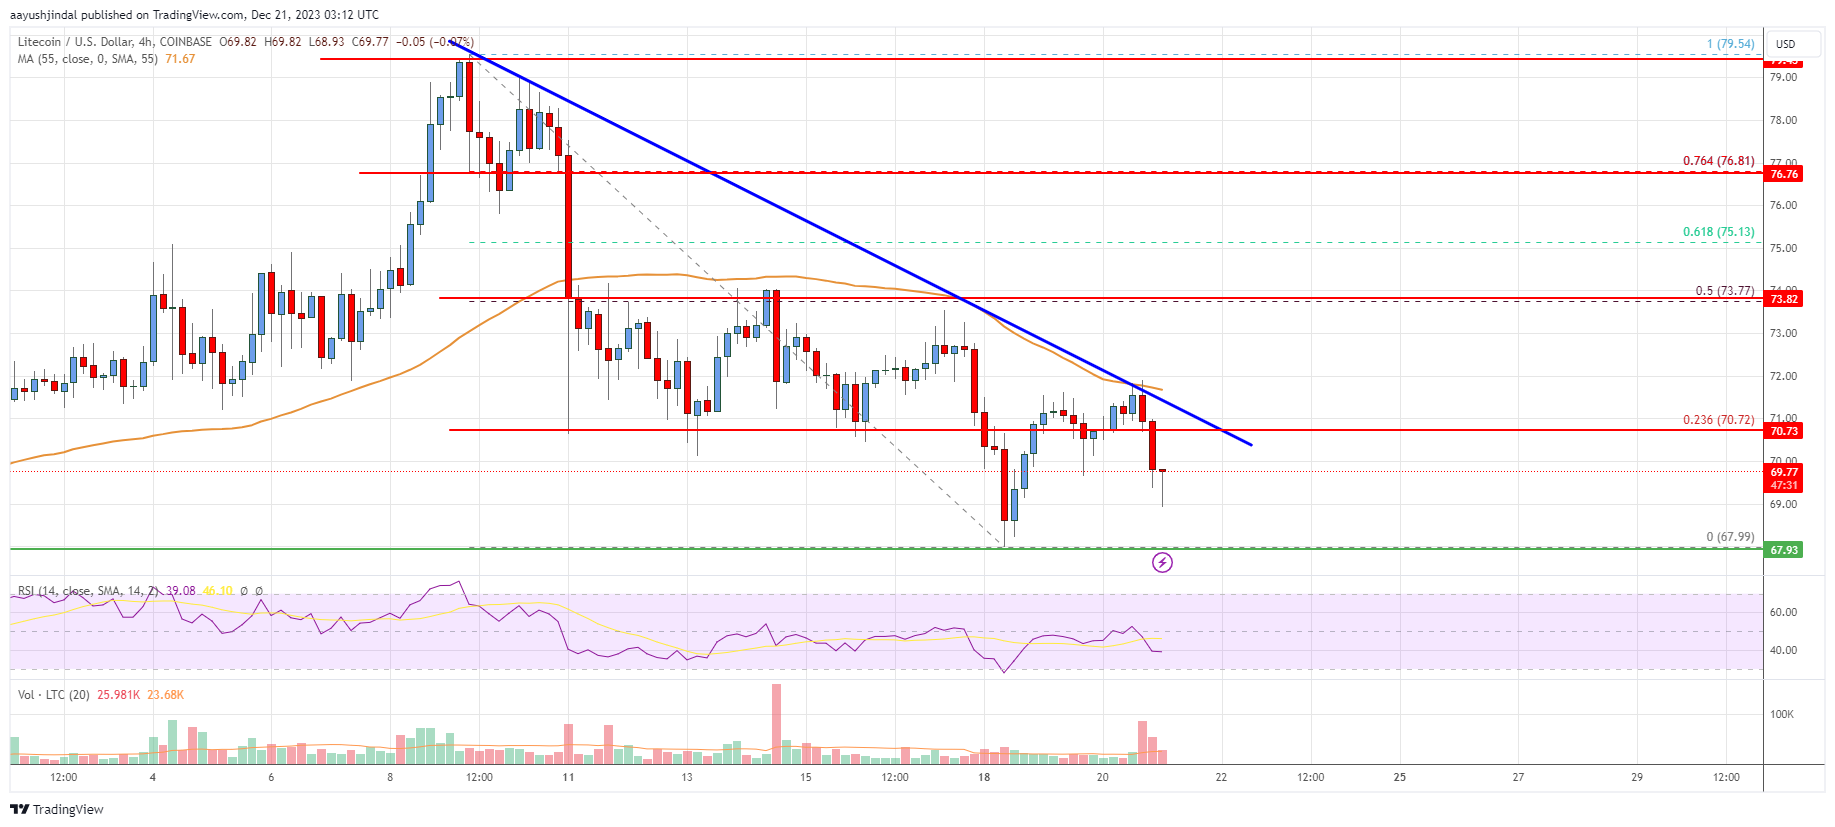 Litecoin (LTC) Price Analysis: Can Bulls Protect This Key Support